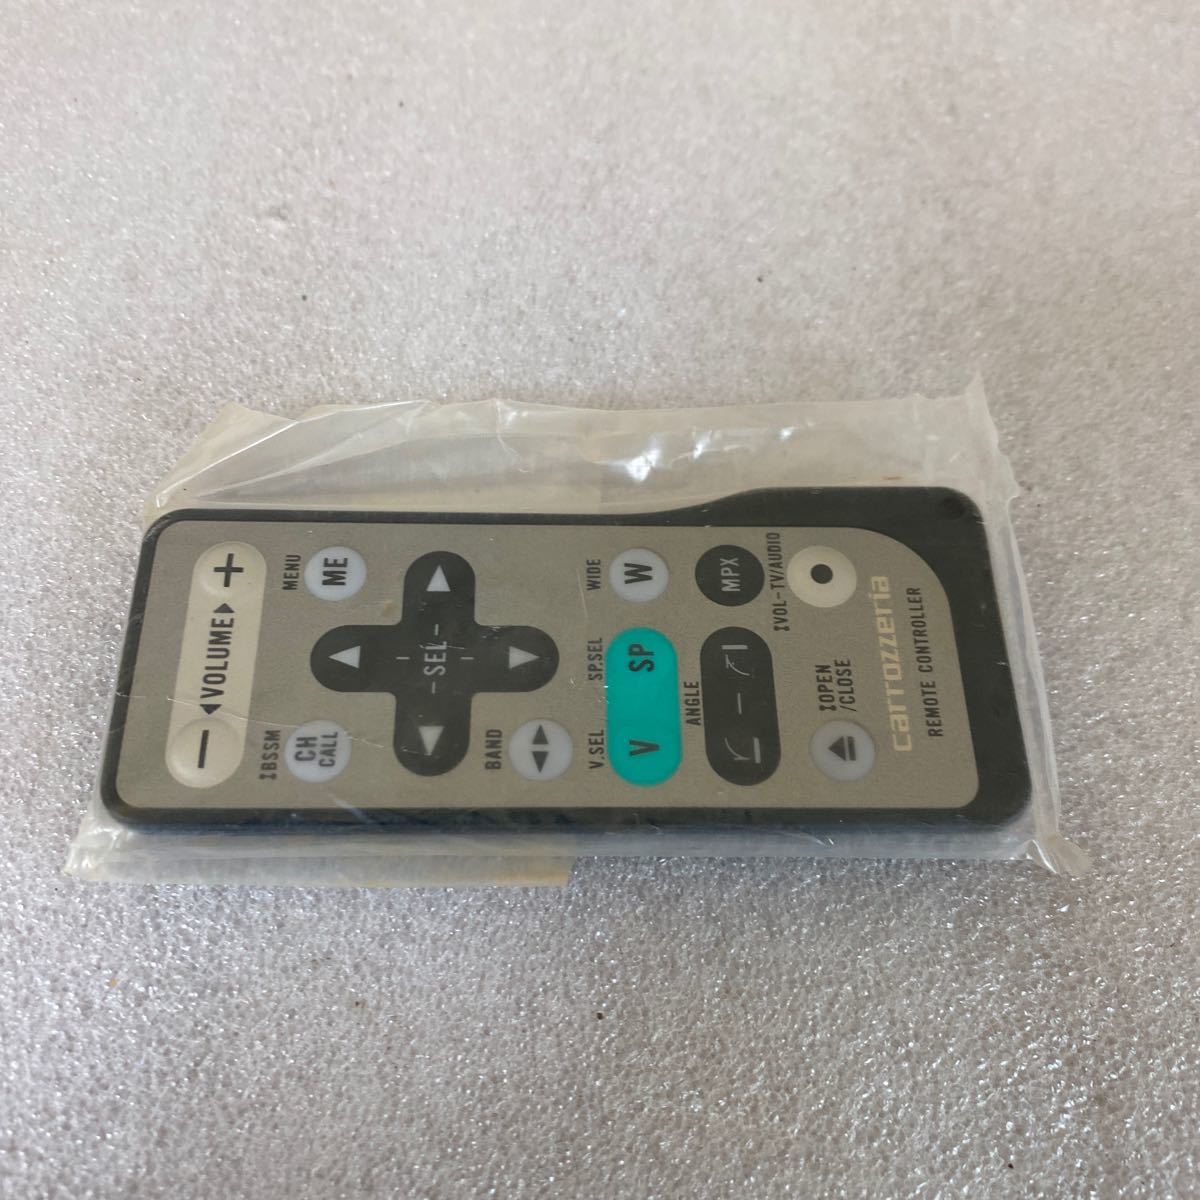  new goods unopened Carrozzeria audio remote control CXB2593 operation not yet verification Junk free shipping 